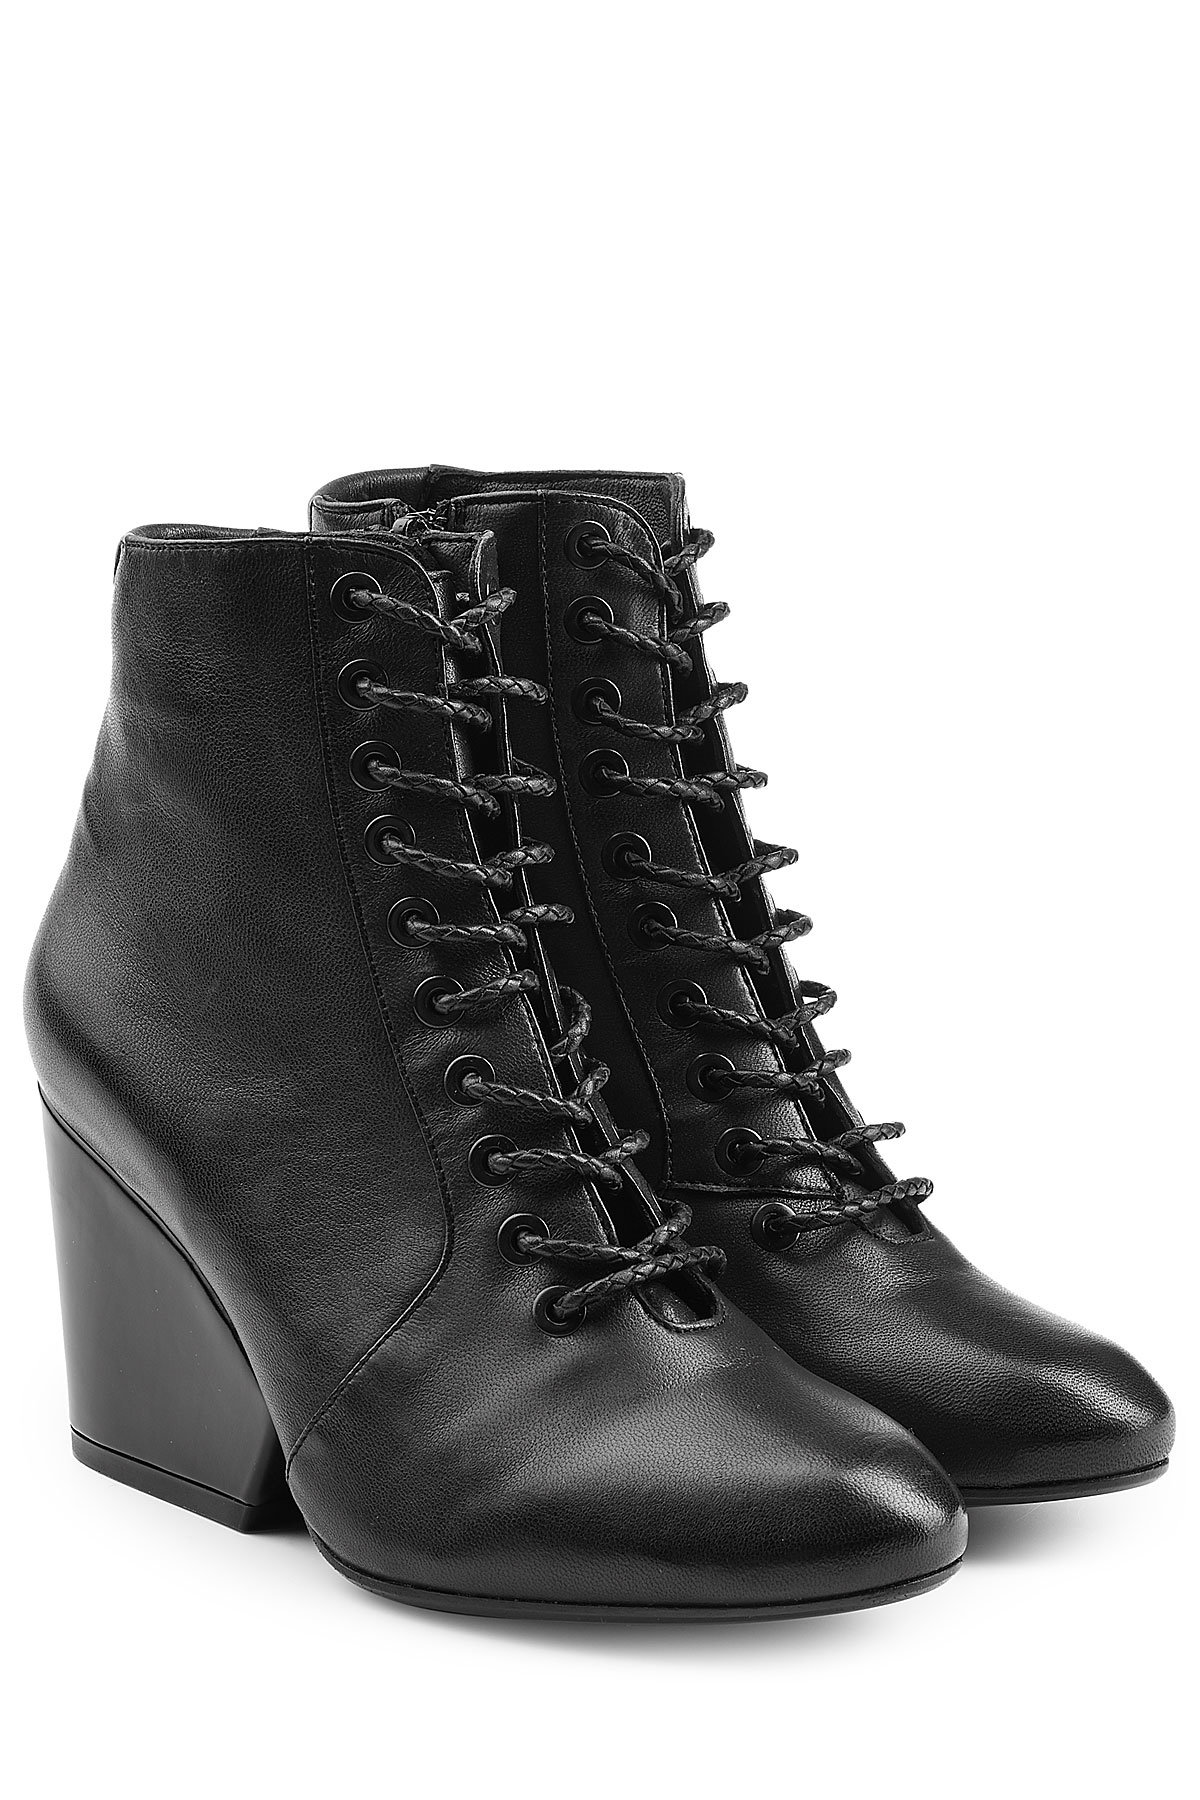 Robert Clergerie - Lace-Up Leather Boots